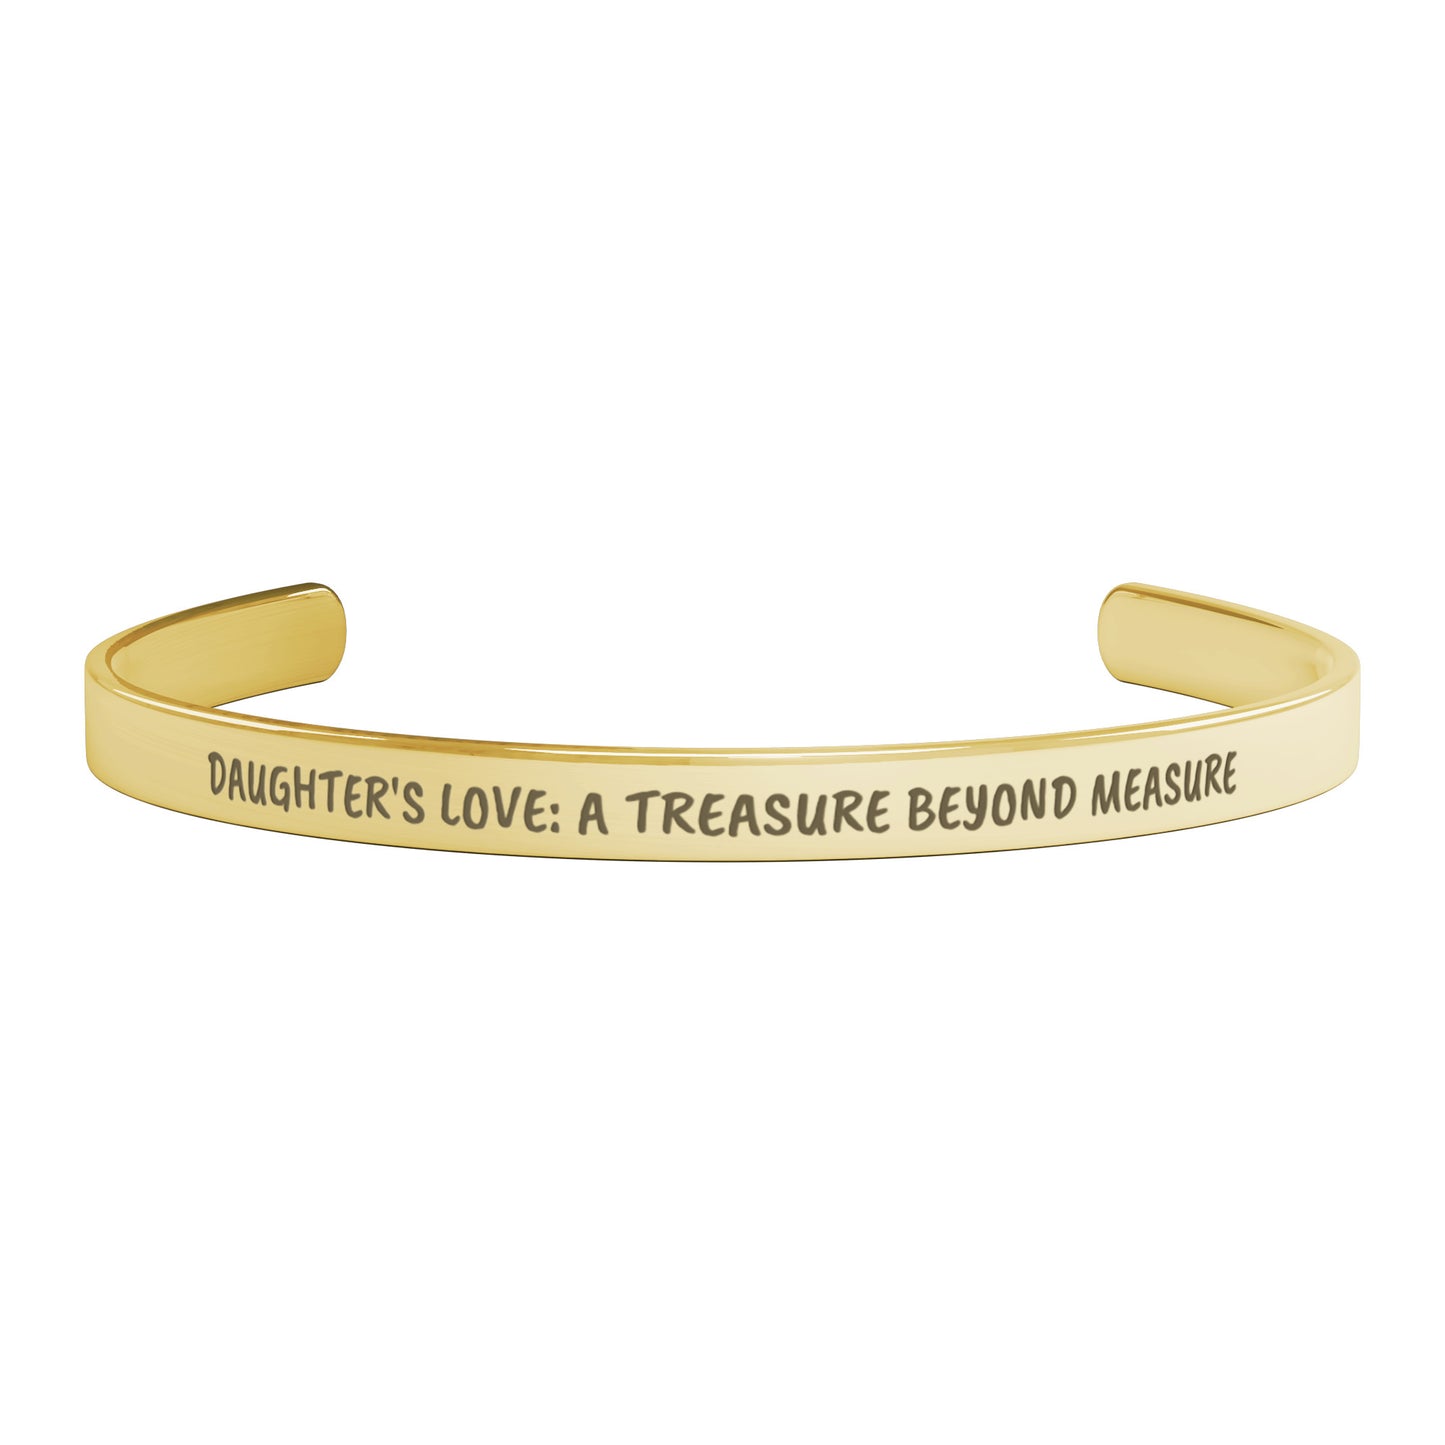 Gift for Daughter | Daughter's Love: A Treasure Beyond Measure Cuff Bracelet